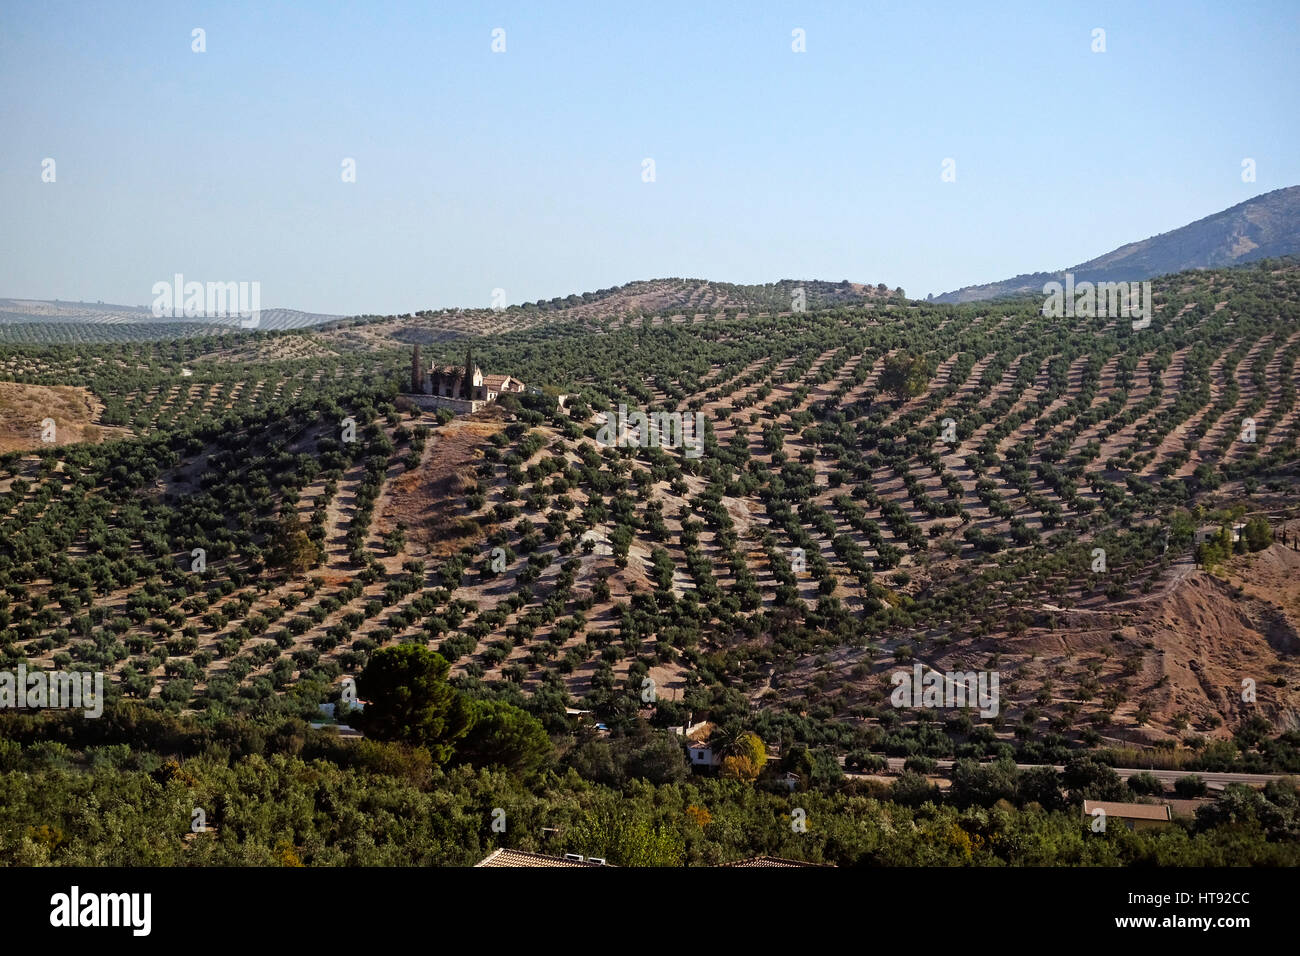 Scenic view of farmland with orchards enroute from Granada to Madrid, Spain Stock Photo